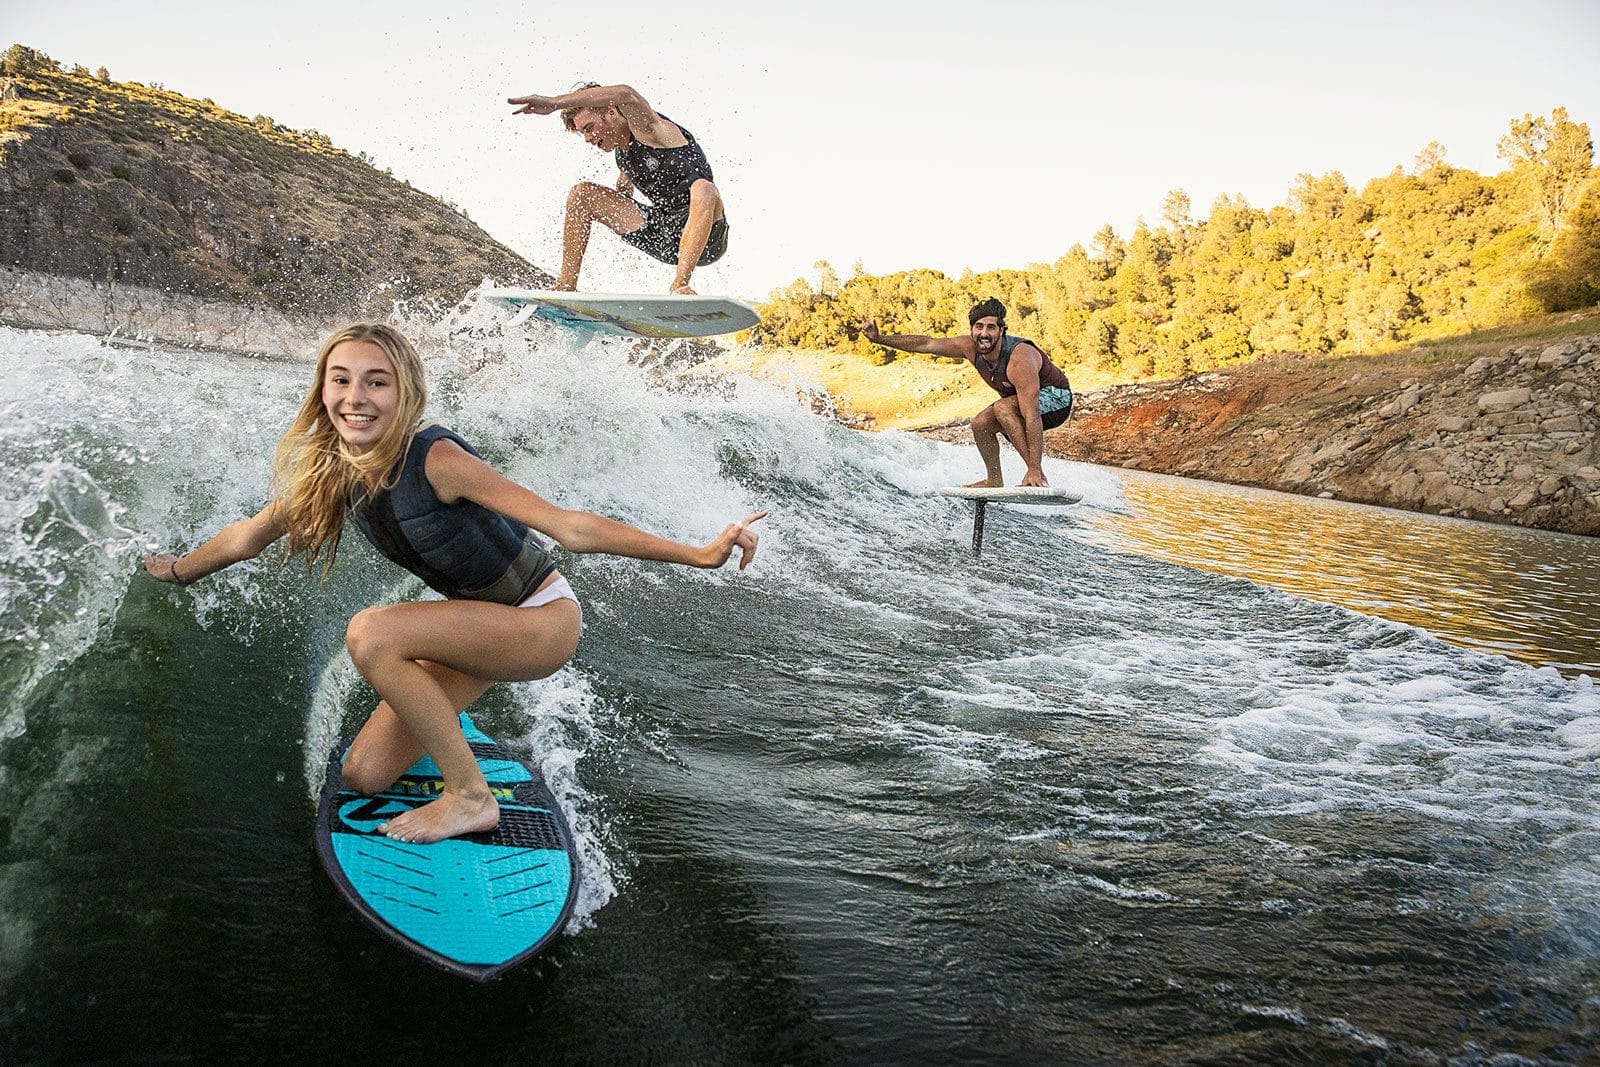 A group of people riding surfboards, captured in a vibrant web design.